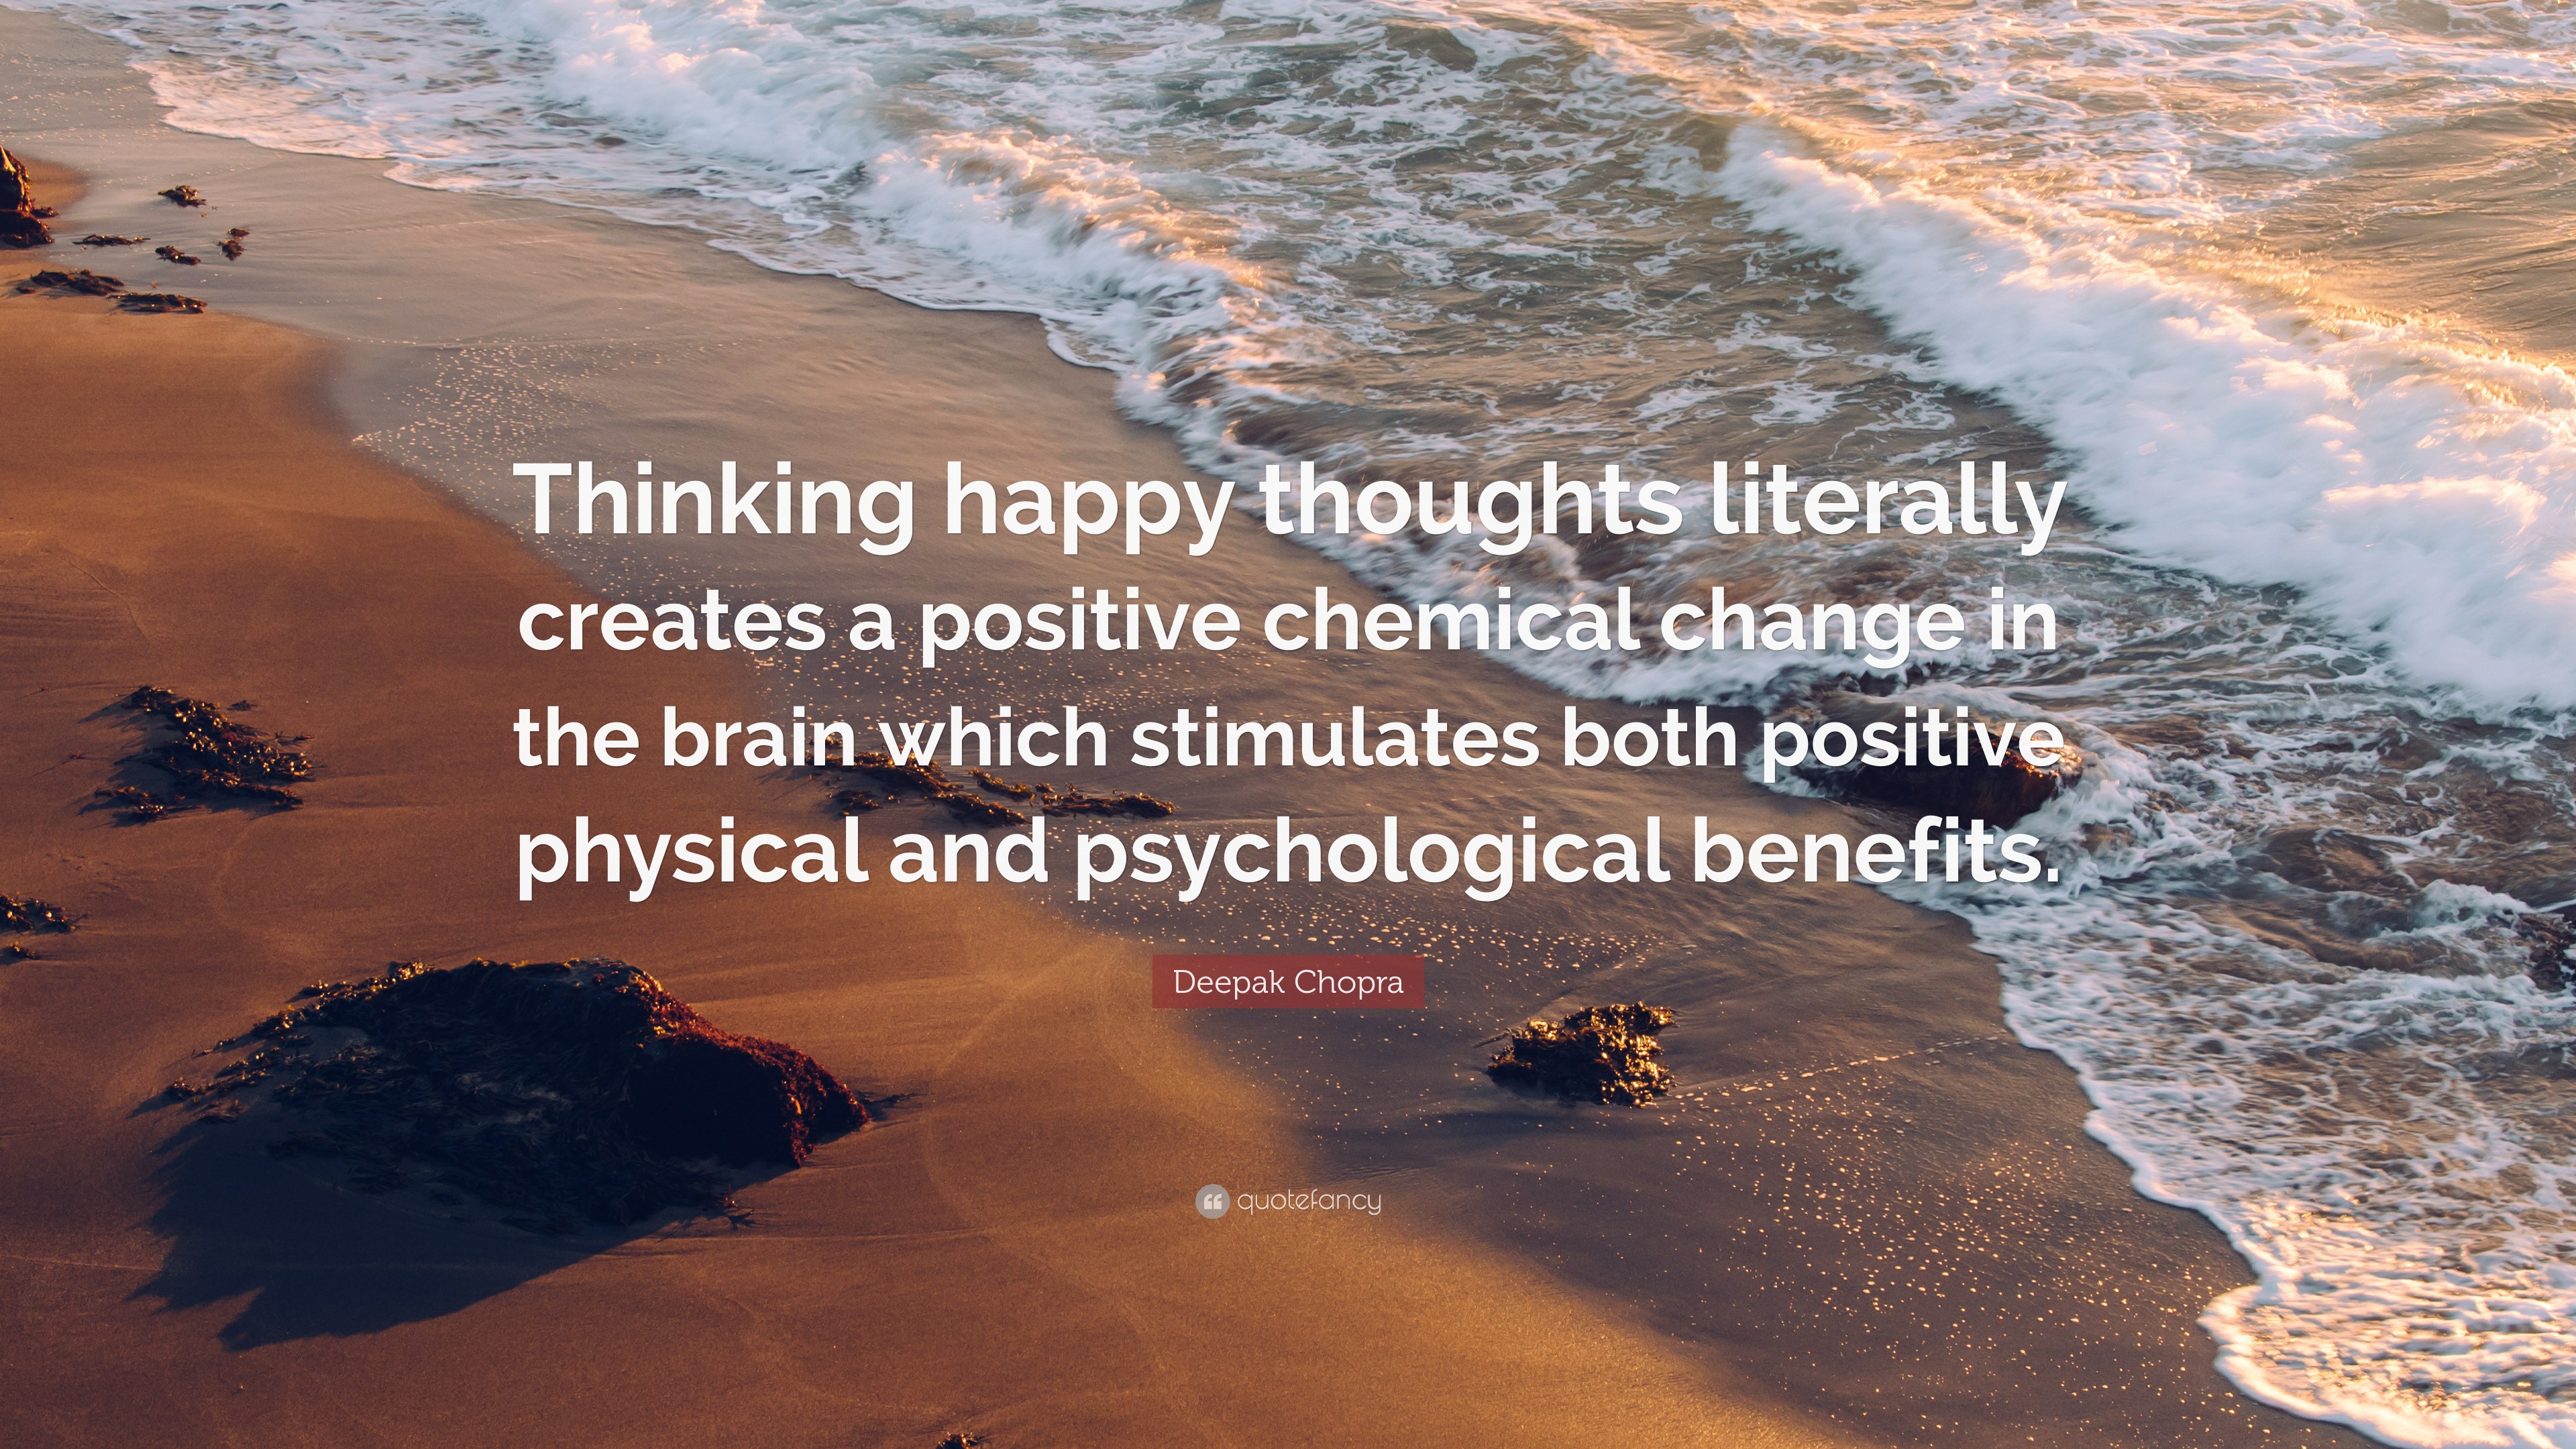 https://quotefancy.com/media/wallpaper/3840x2160/2308526-Deepak-Chopra-Quote-Thinking-happy-thoughts-literally-creates-a.jpg